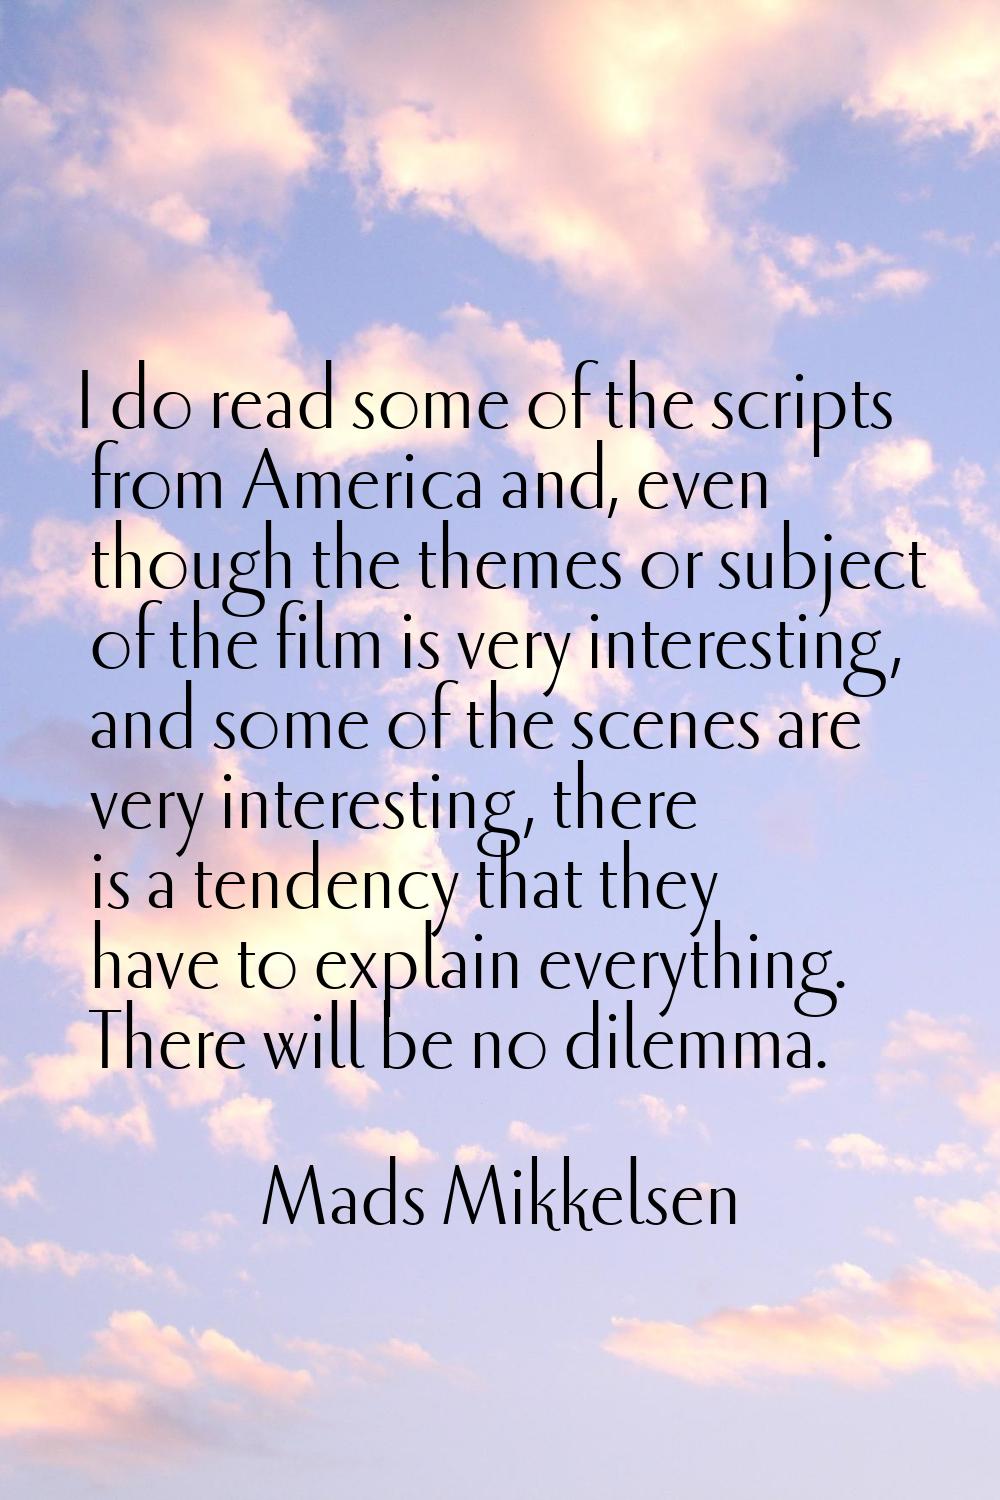 I do read some of the scripts from America and, even though the themes or subject of the film is ve